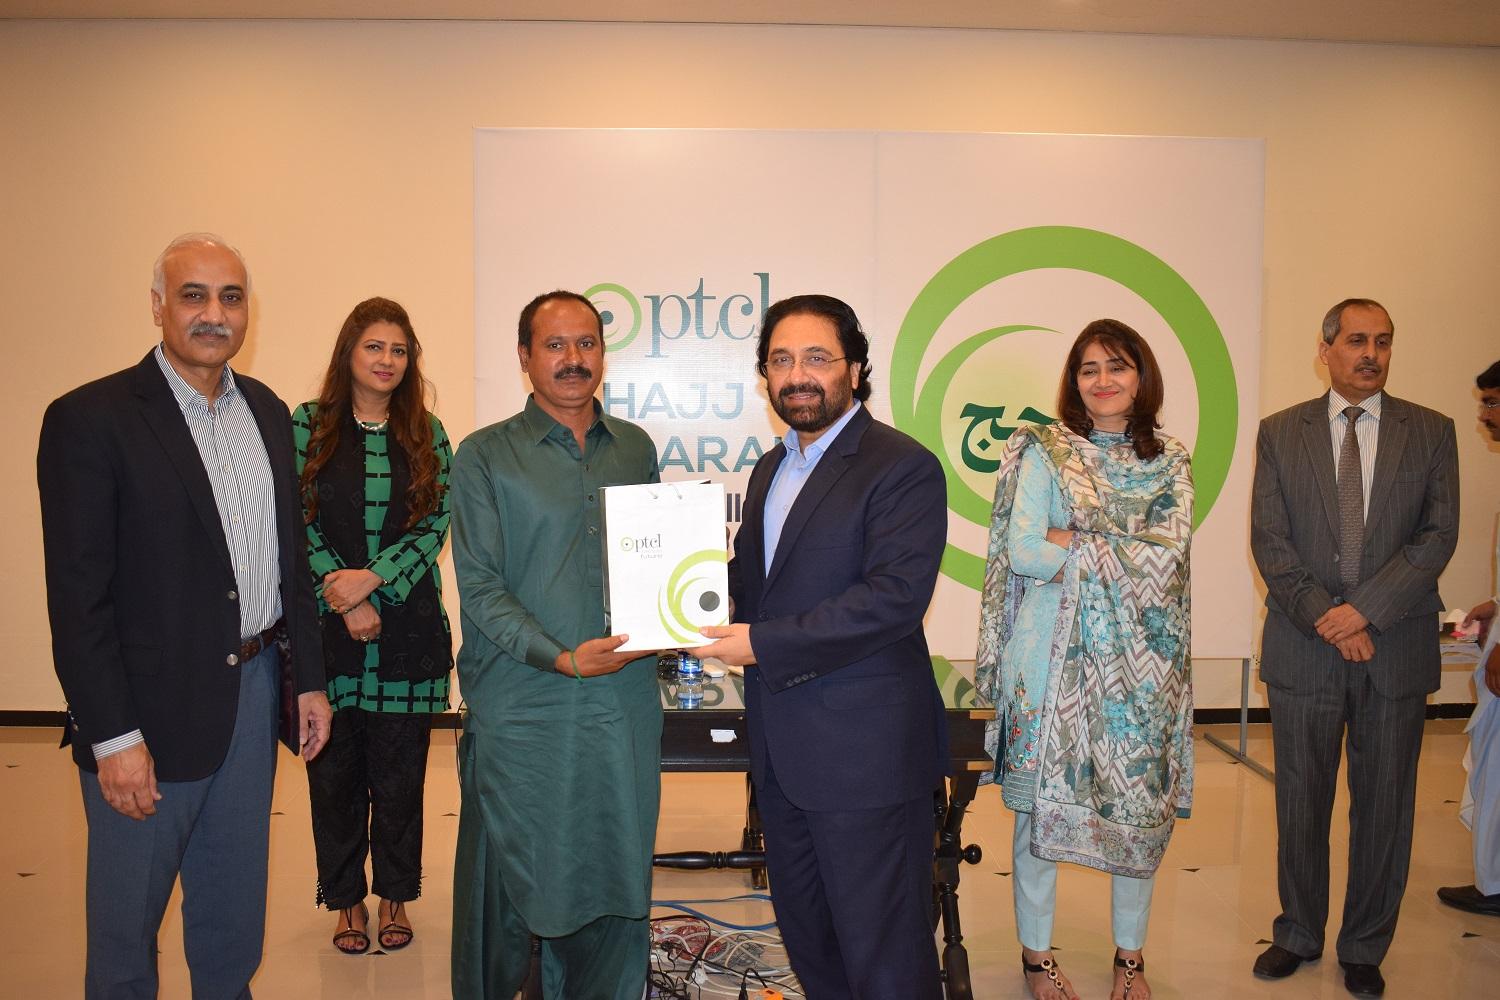 PTCL HOLDS RECEPTION IN HONOUR OF ITS RETURNING HAJJIS